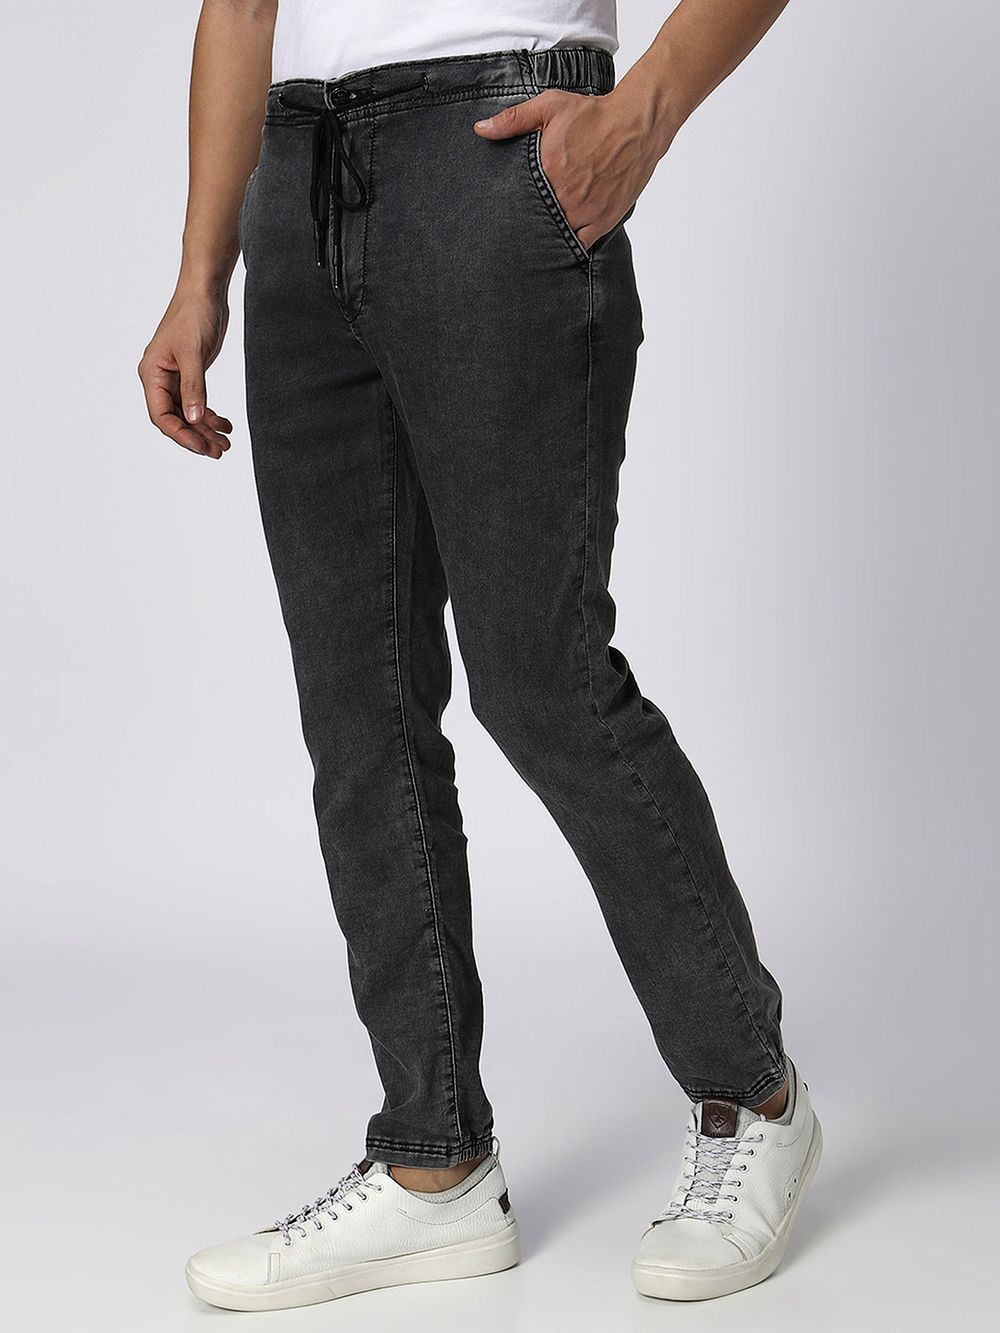 Charcoal Sport Fit Flyweight Joggers